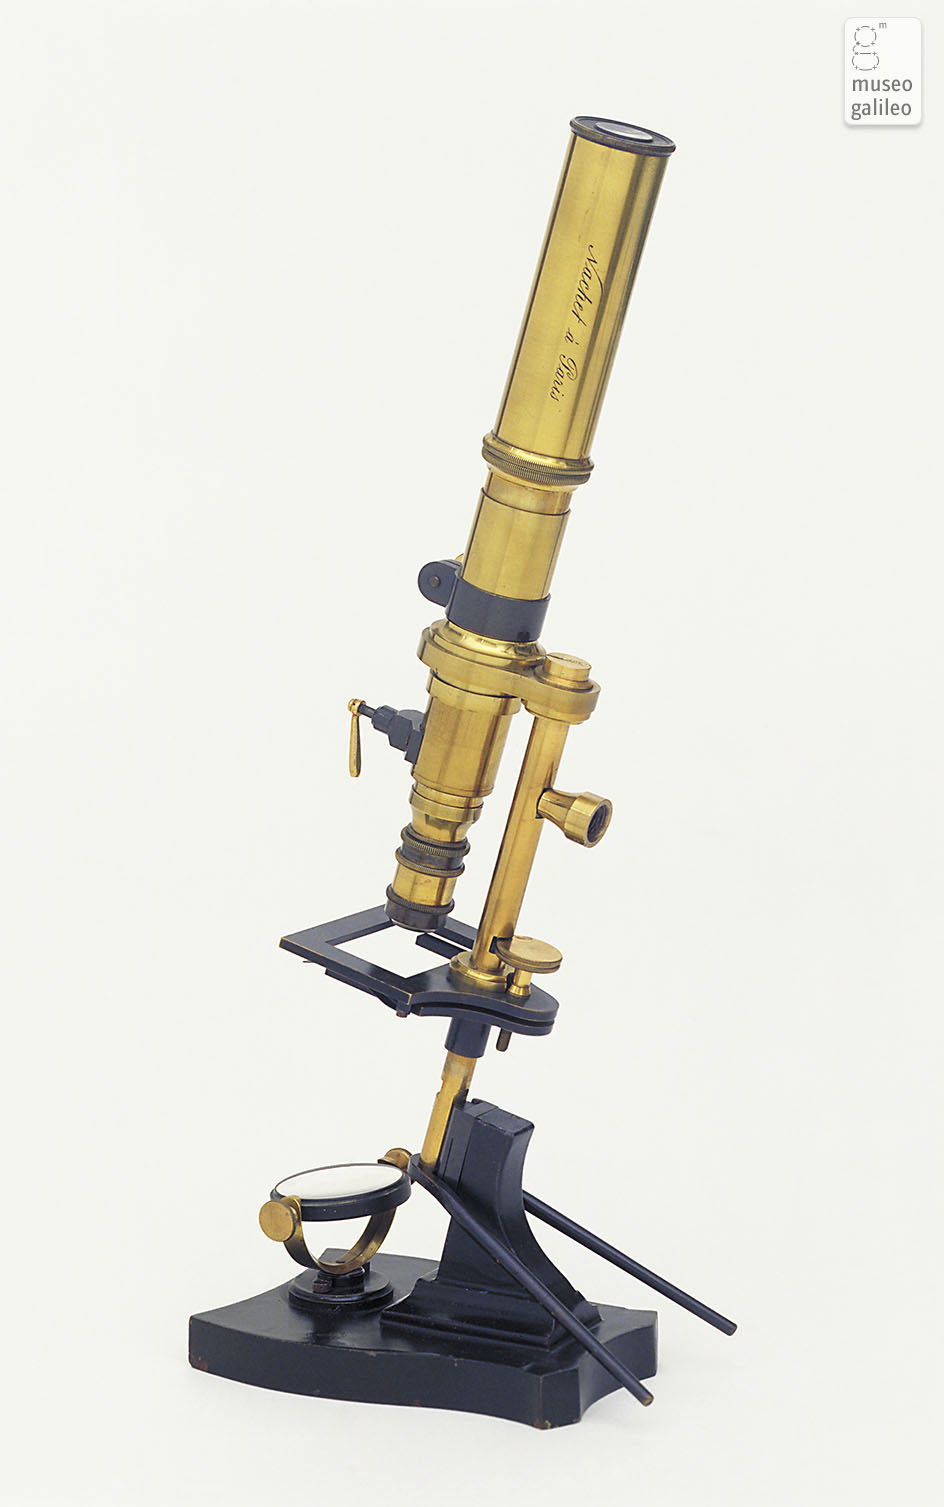 Compound microscope, demonstration (Inv. 3208)